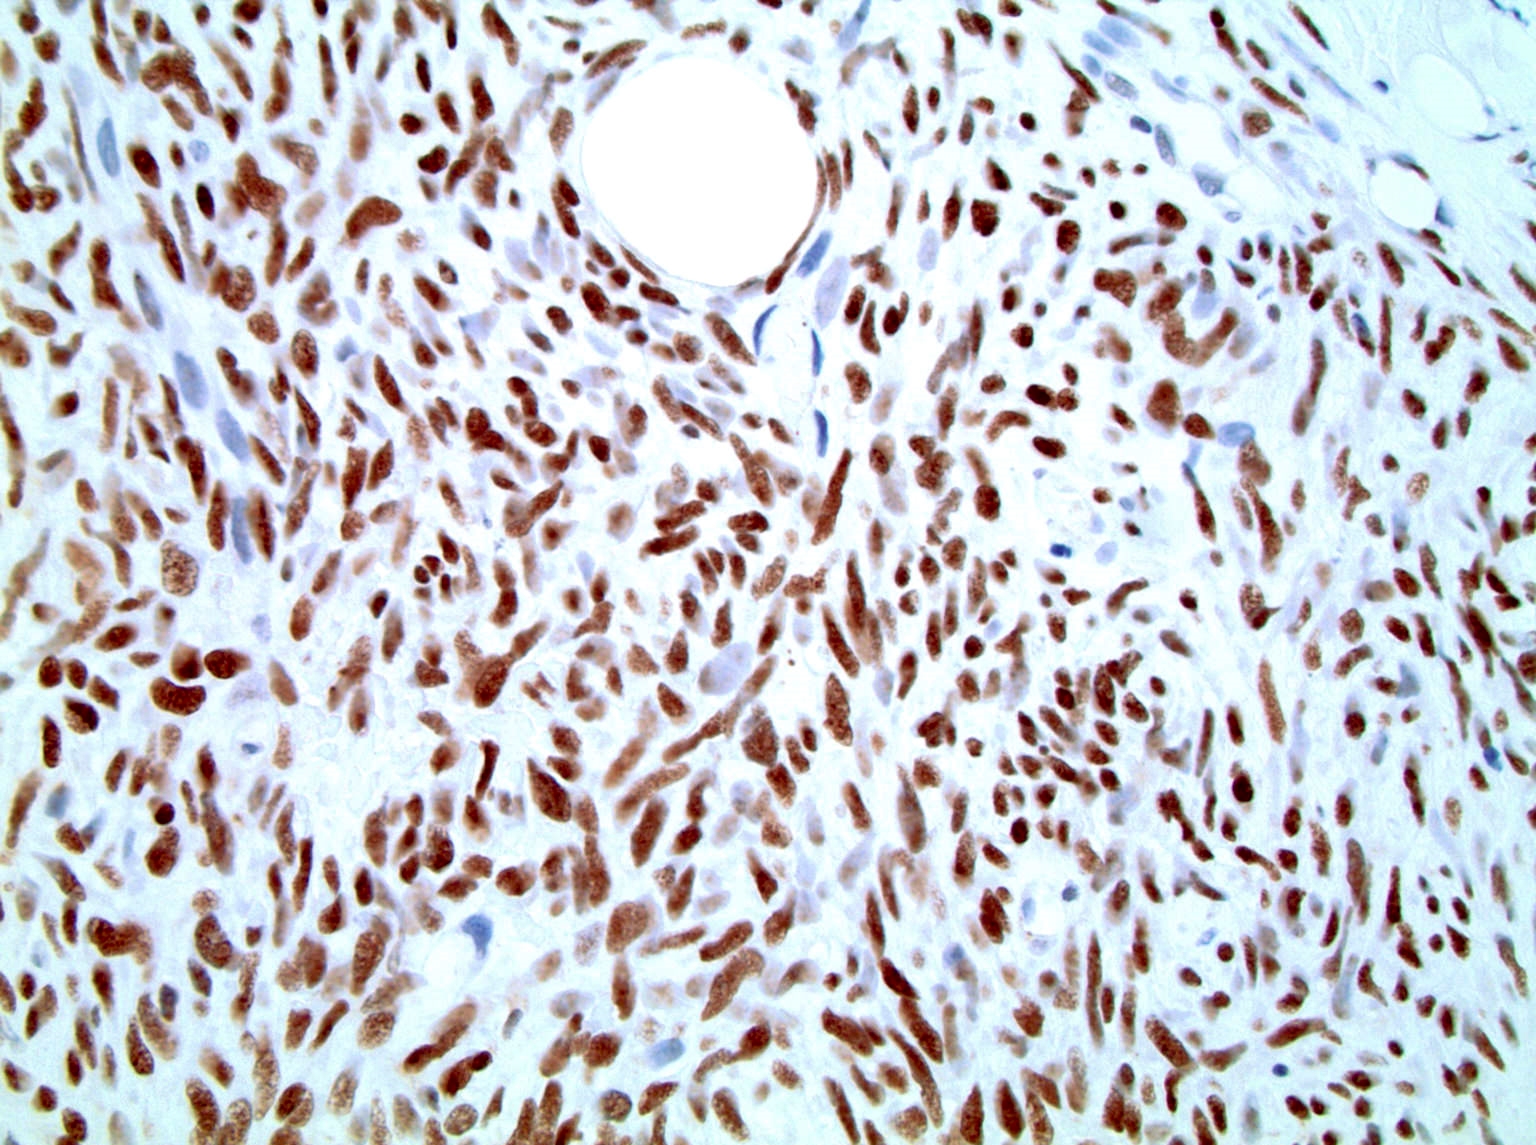 Monophasic synovial sarcoma, TLE1 positive